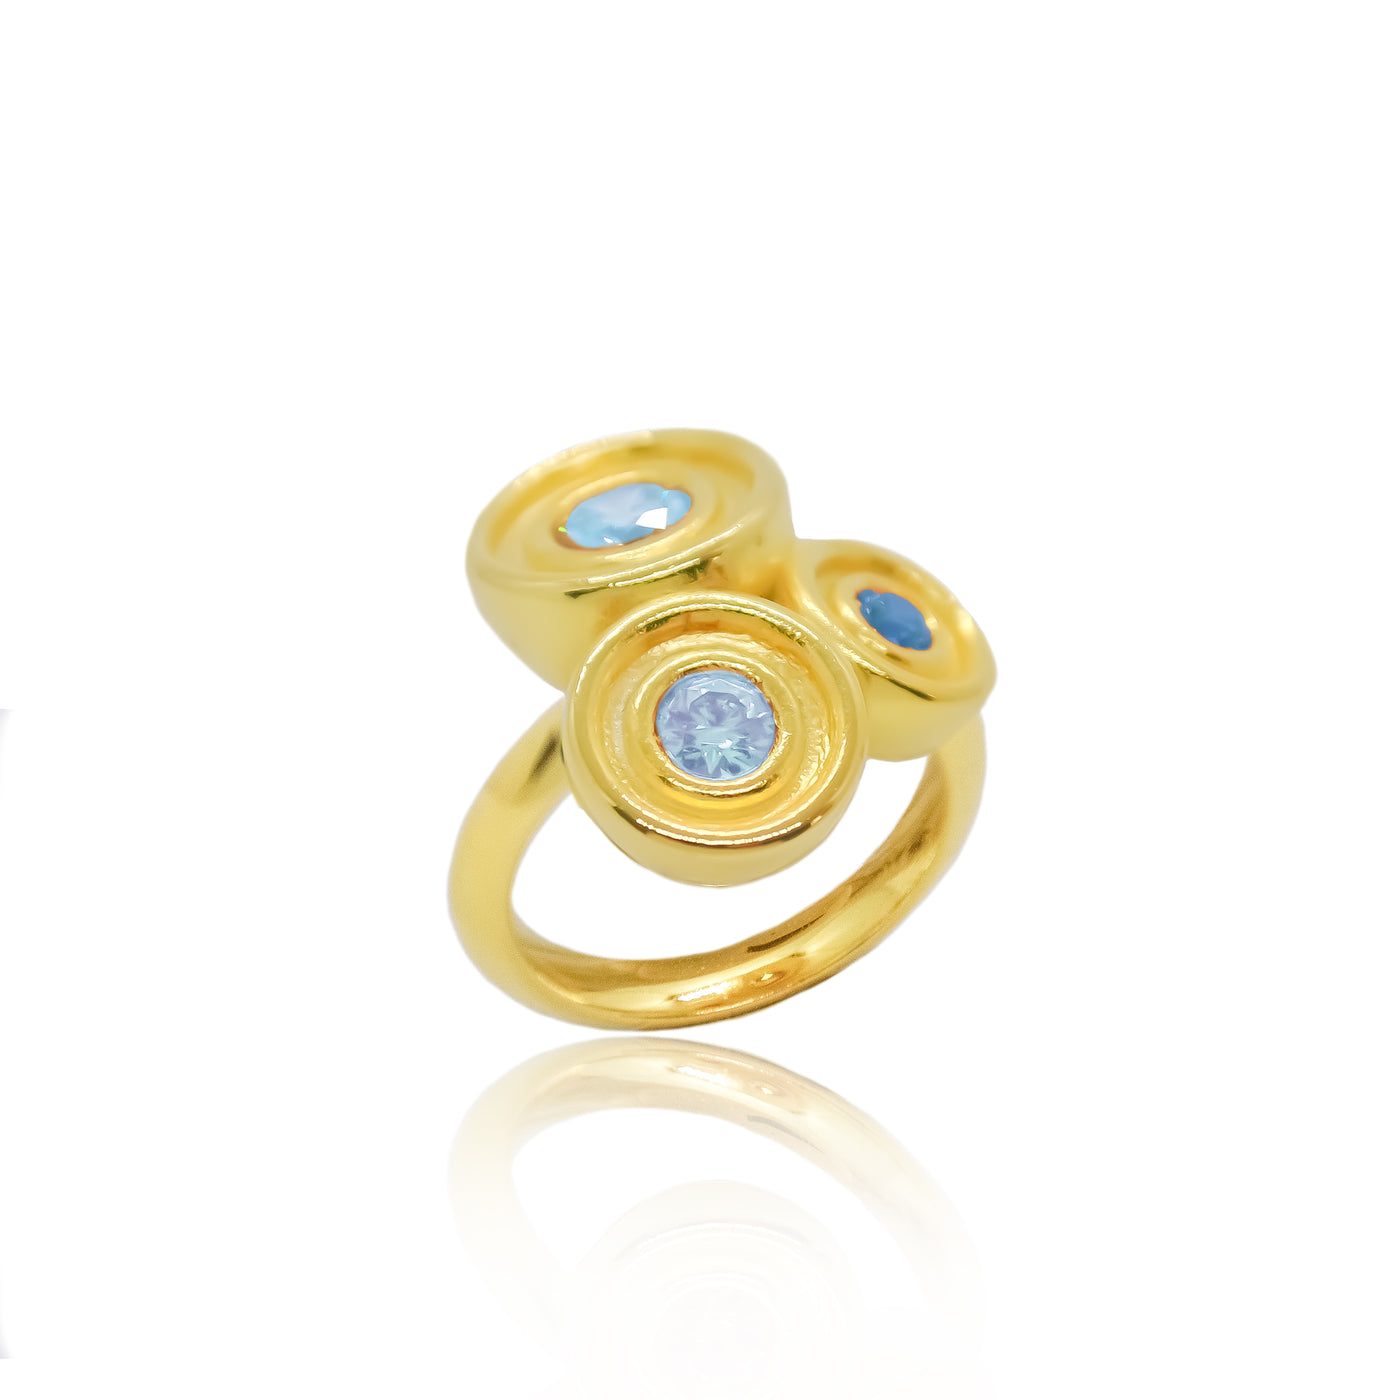 Gold Cocktail ring with aquamarine and topaz from Atelier ORMAN